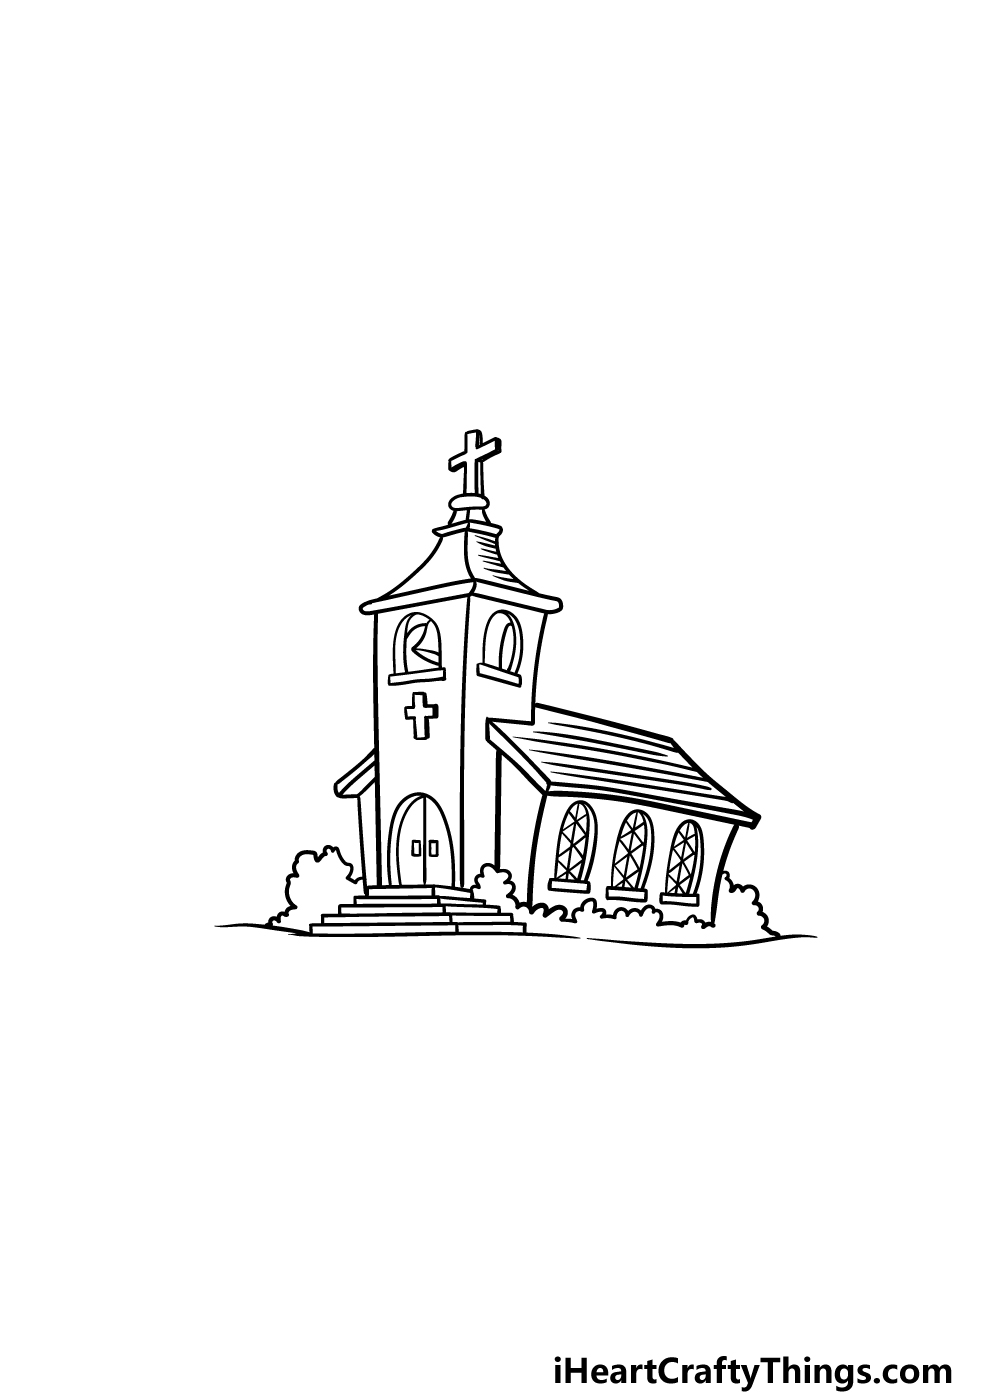 How to draw a church | Step by step Drawing tutorials